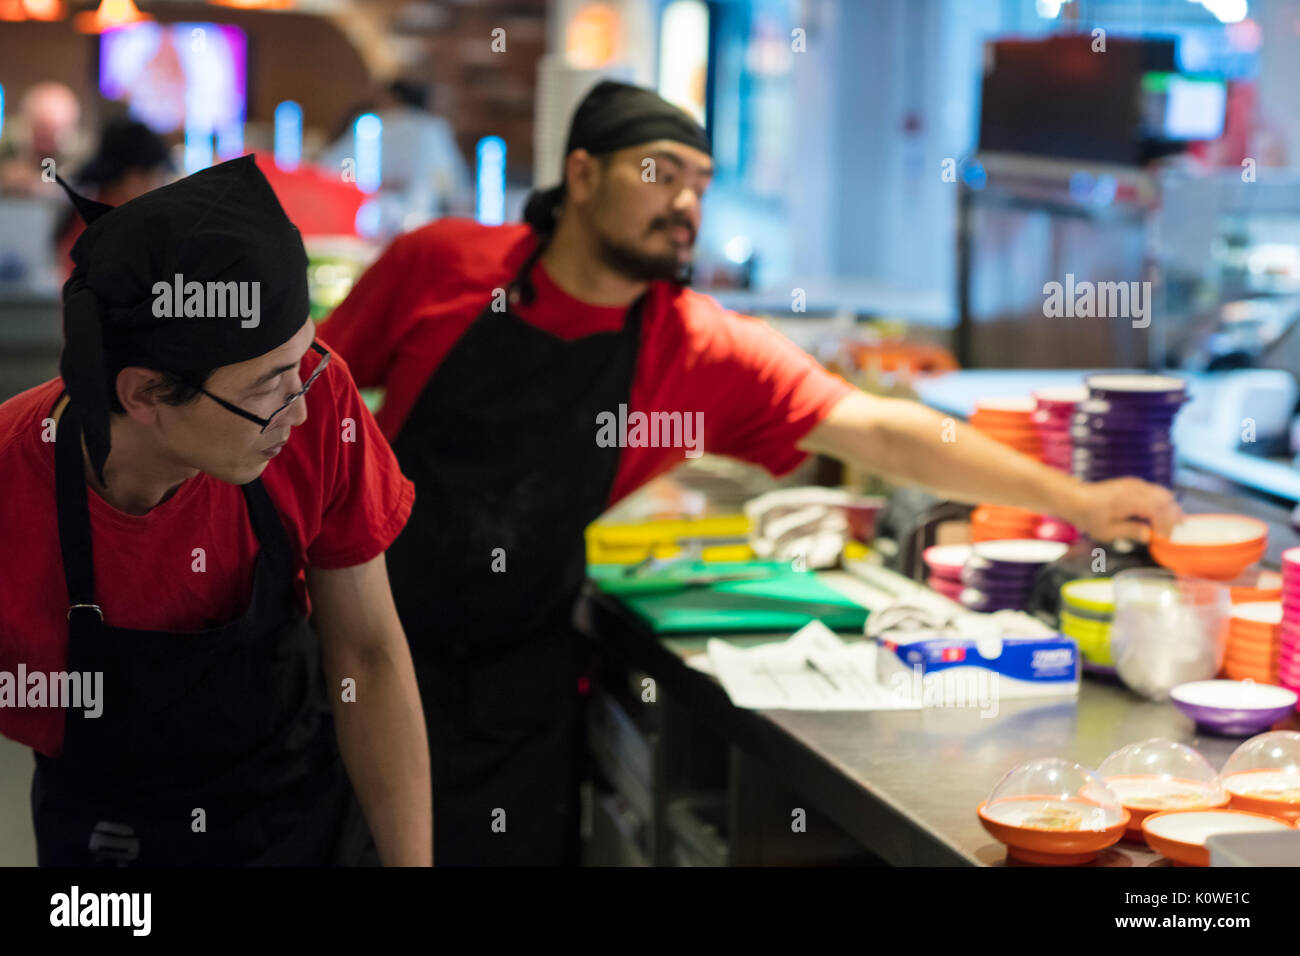 Busy production of sushi in Japanese restaurant Stock Photo